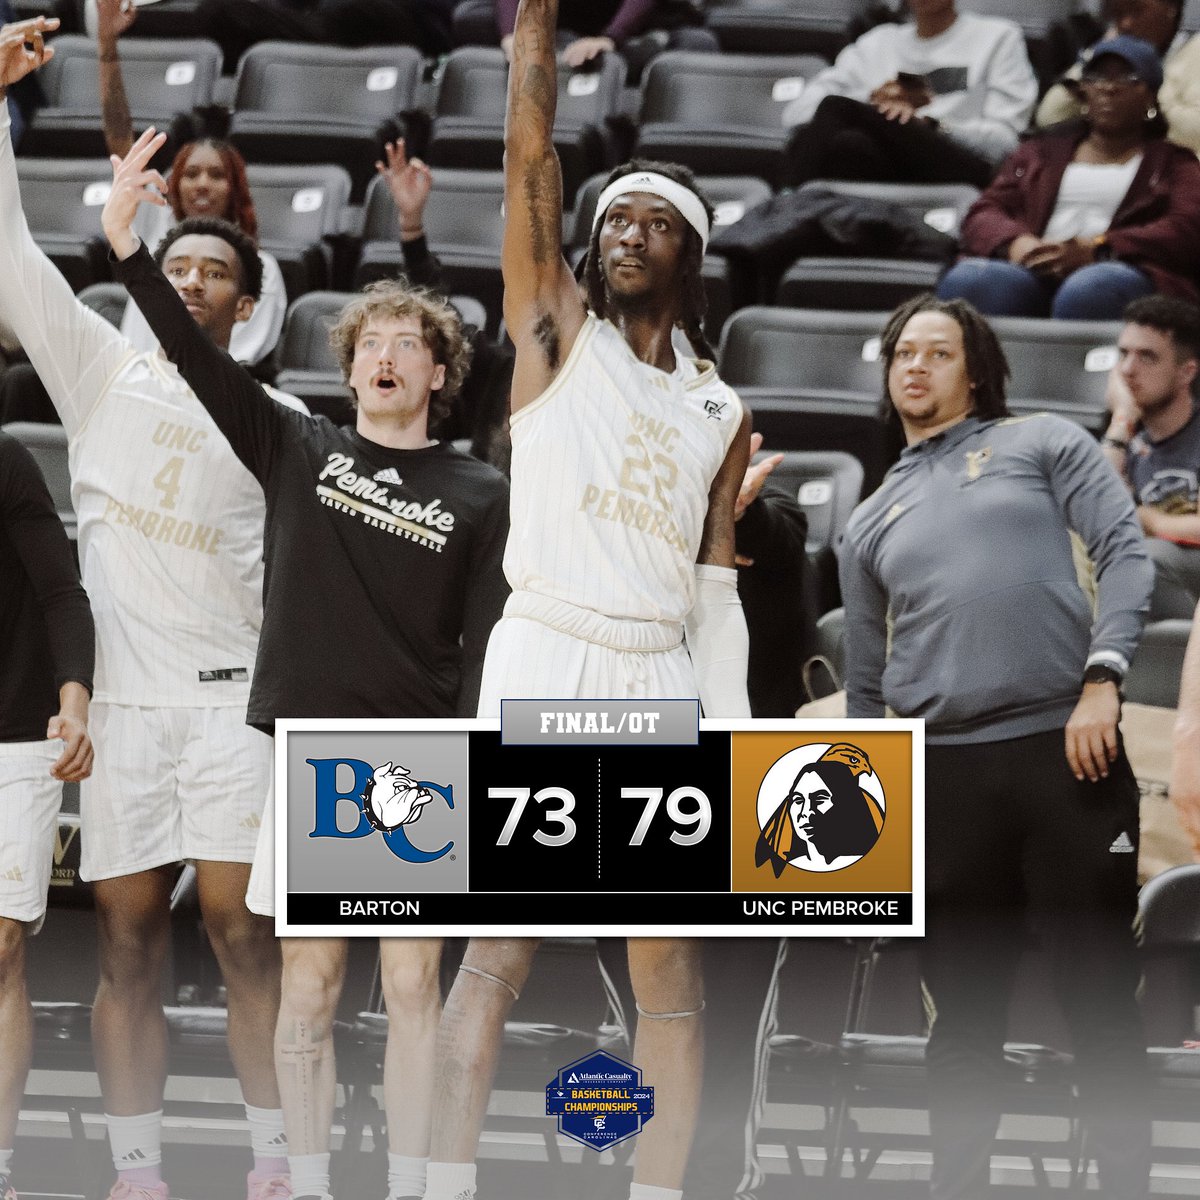 UNC Pembroke holds on to defeat Barton 79-73 in overtime. #LeadingTheWay